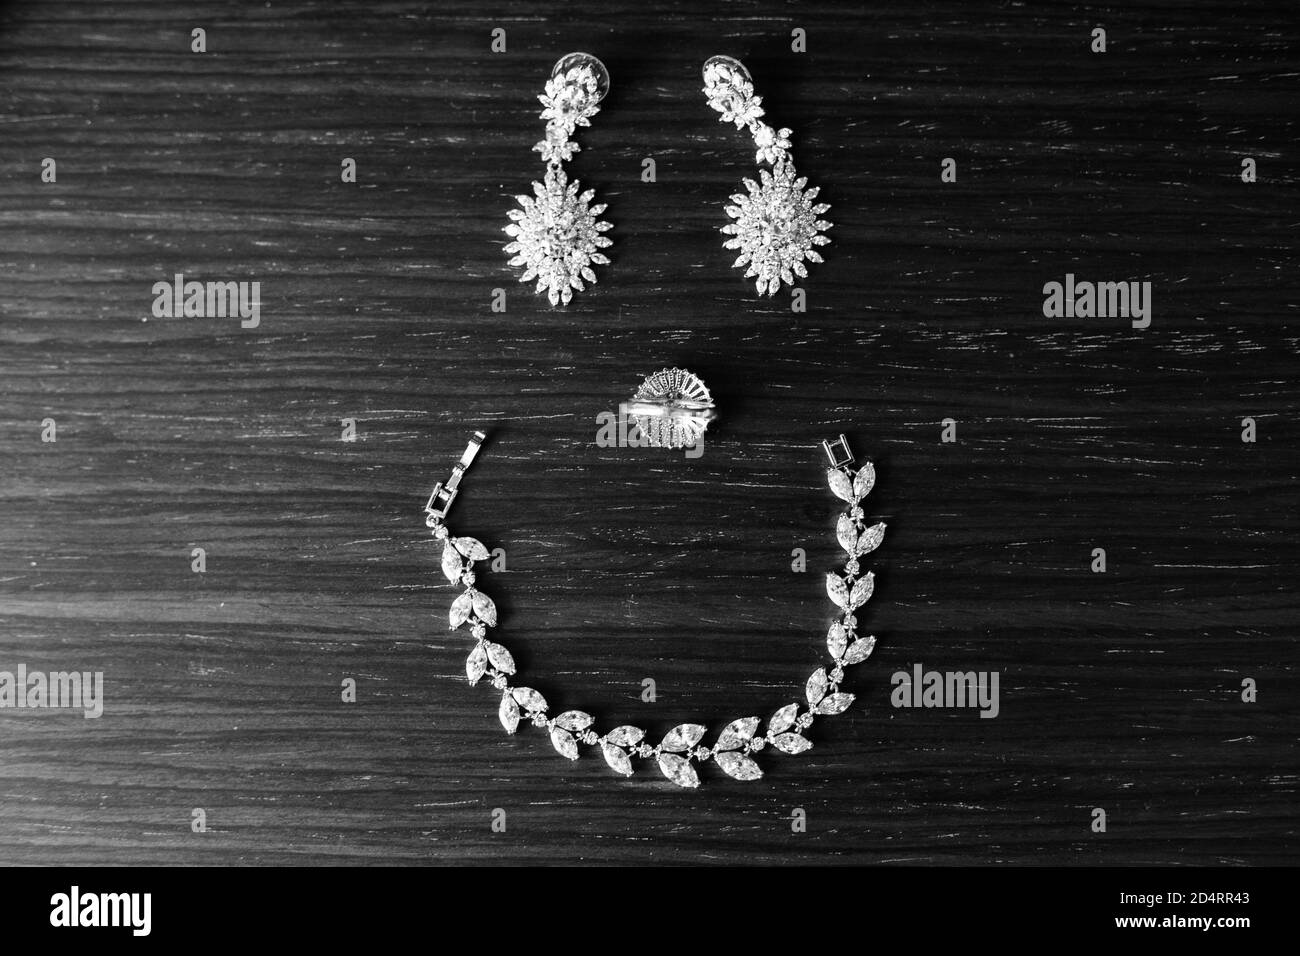 Top view of jewelry forming a smiley face on a black surface Stock Photo